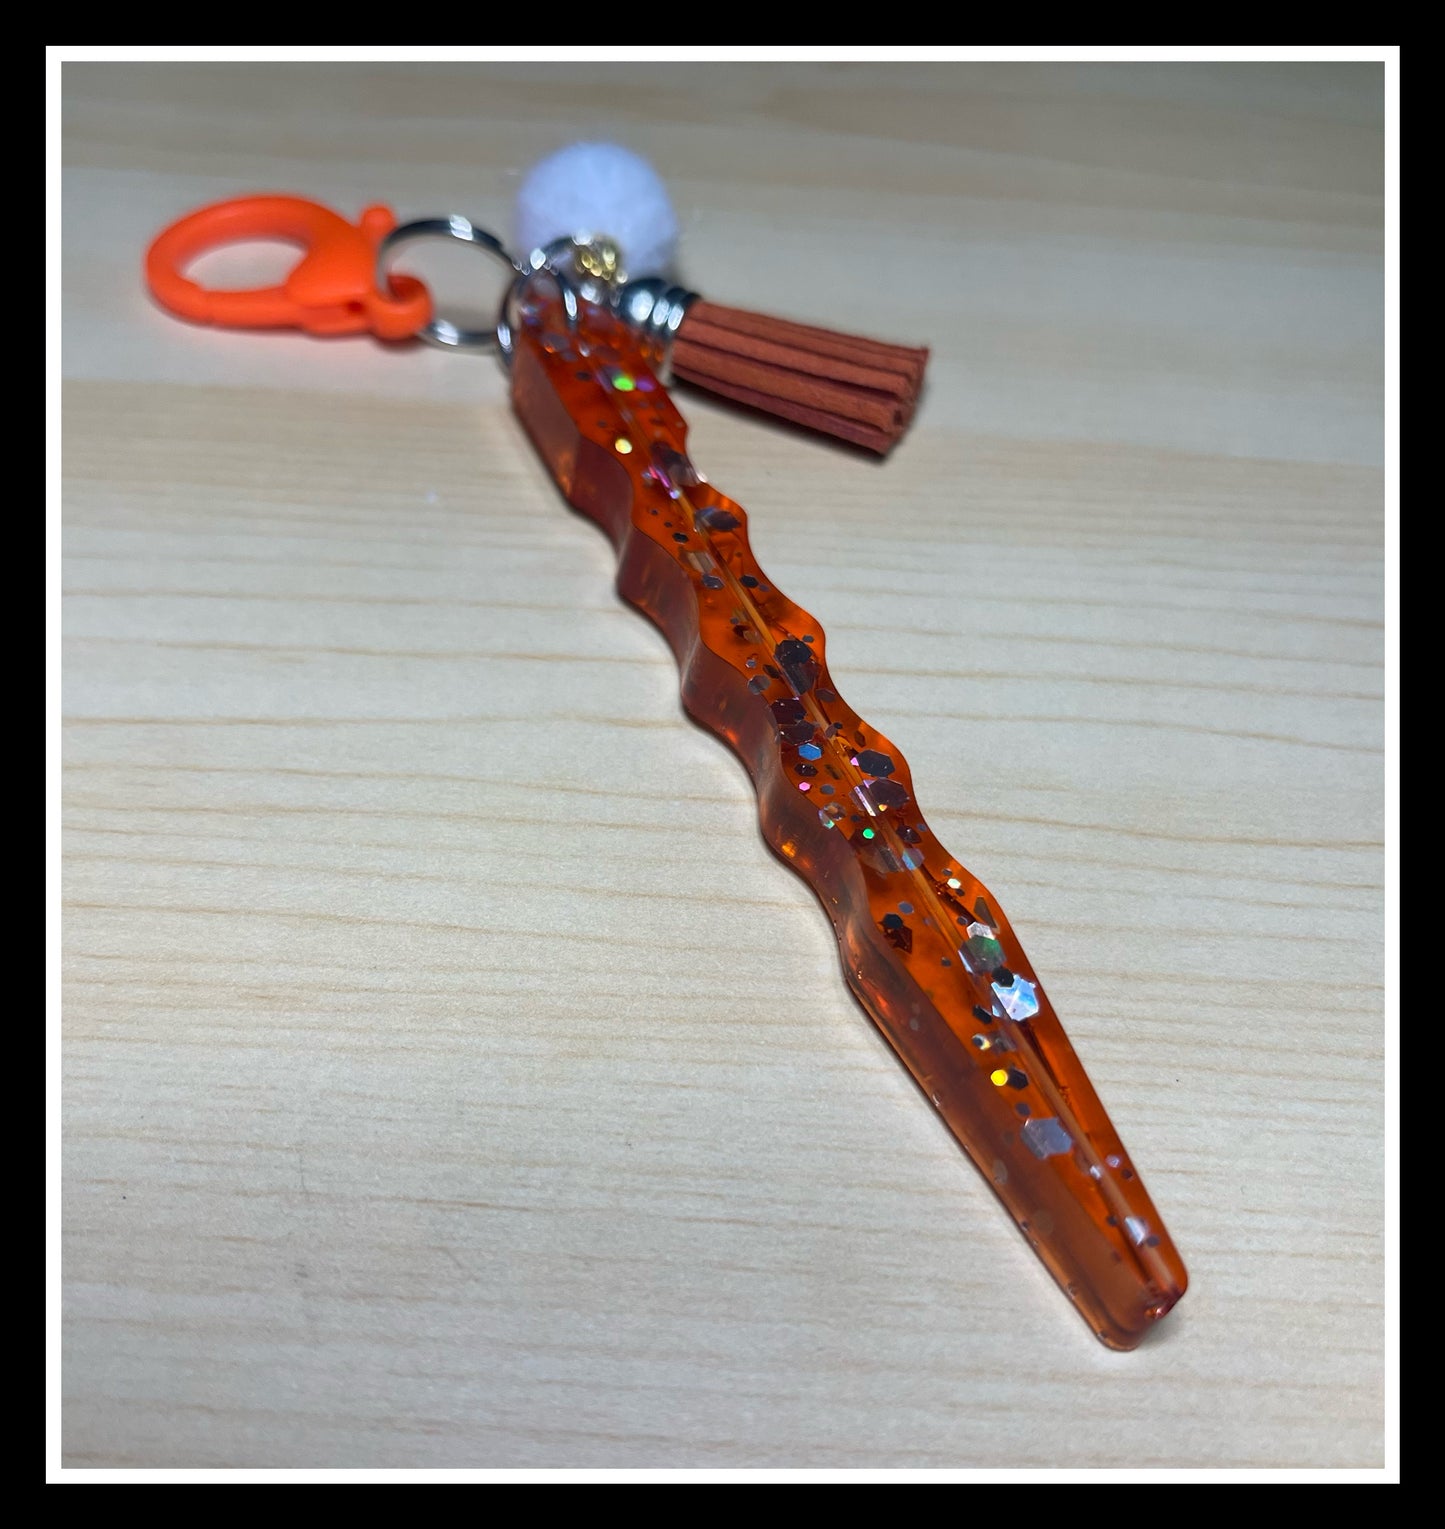 Wand/Shank Keychain (Small) (Multiple Colors Available)